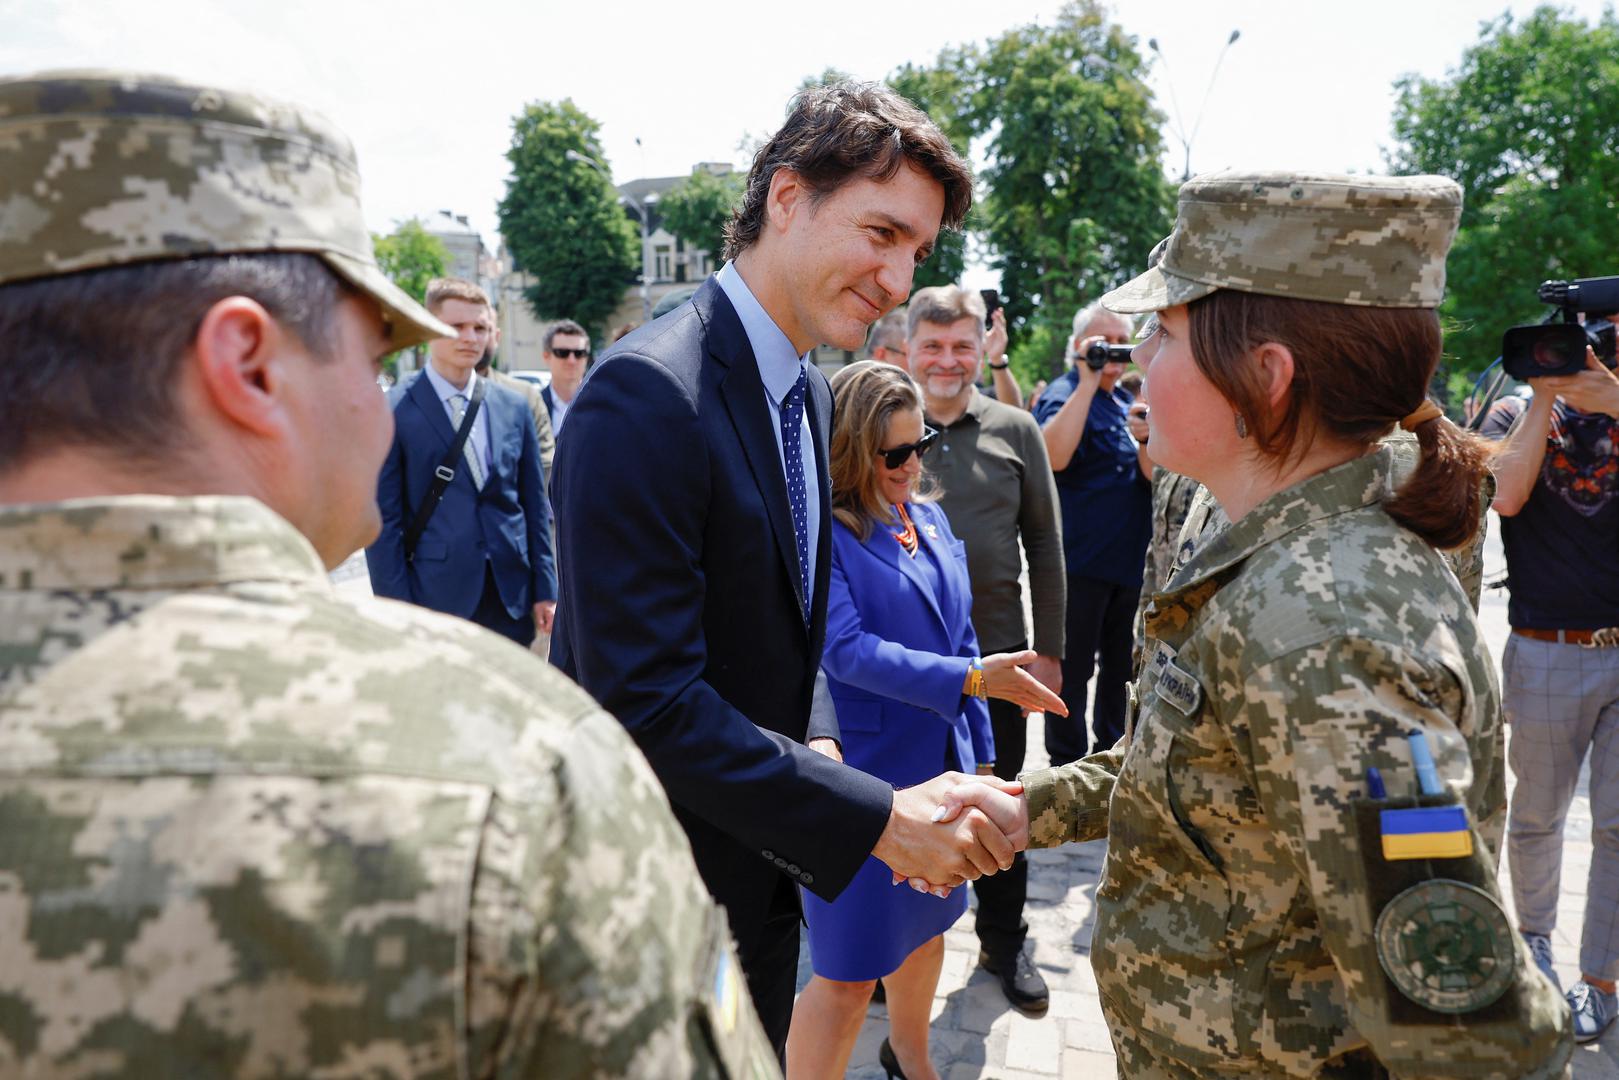 Canadian Prime Minister Justin Trudeau shakes hands with a Ukrainian soldier as he visits the Wall of Remembrance to pay tribute to killed Ukrainian soldiers, amid Russia's attack on Ukraine, in Kyiv, Ukraine June 10, 2023. REUTERS/Valentyn Ogirenko/Pool Photo: VALENTYN OGIRENKO/REUTERS